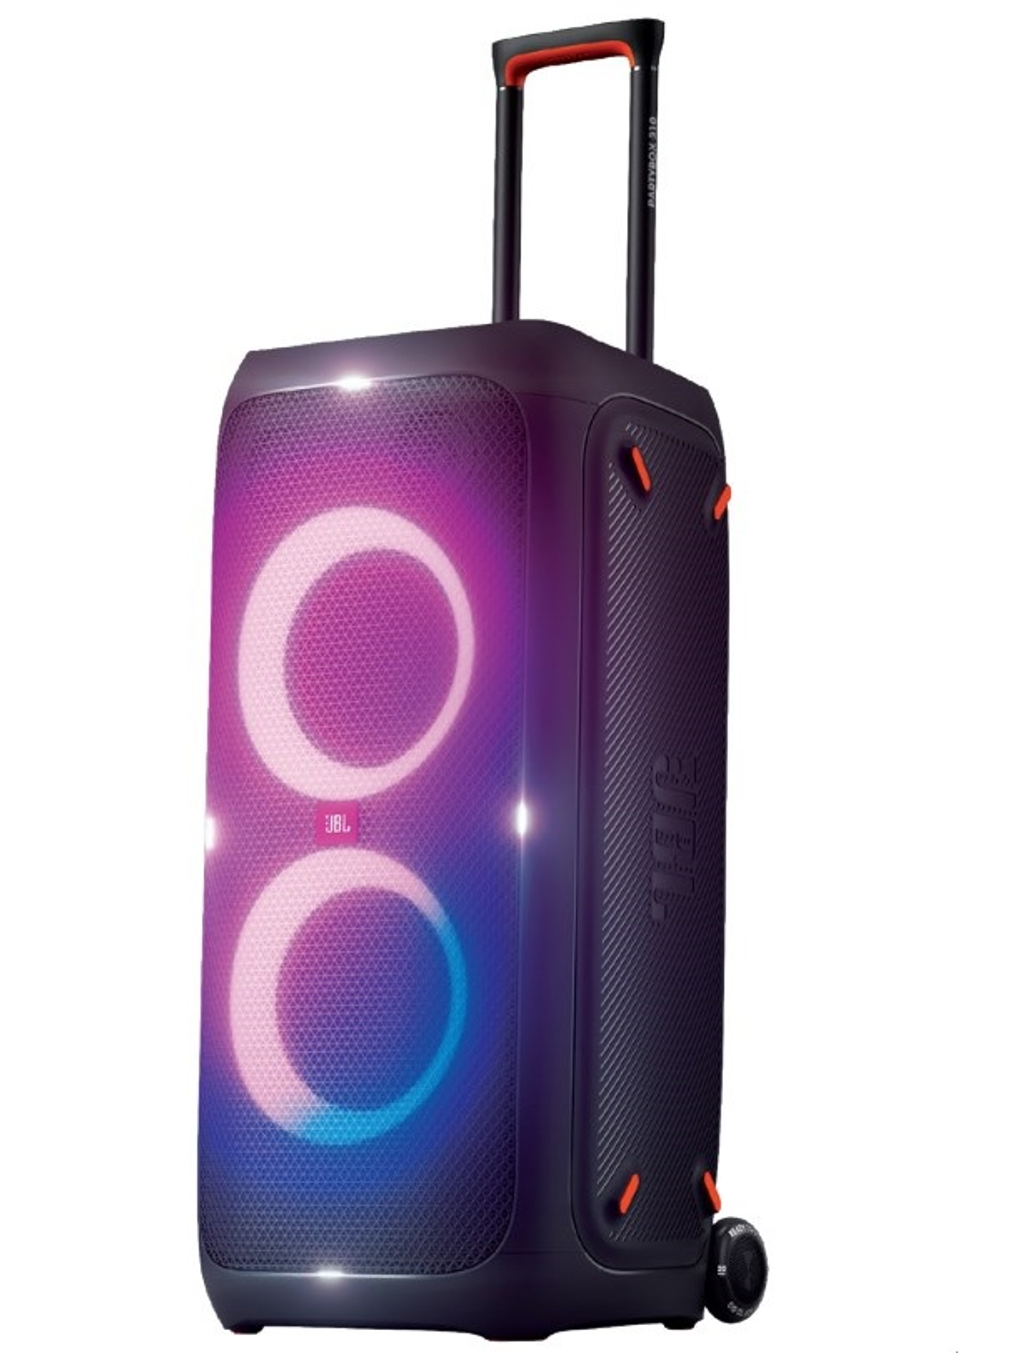 Rent the JBL party box 310 speaker and other sound equipment at BIYU.